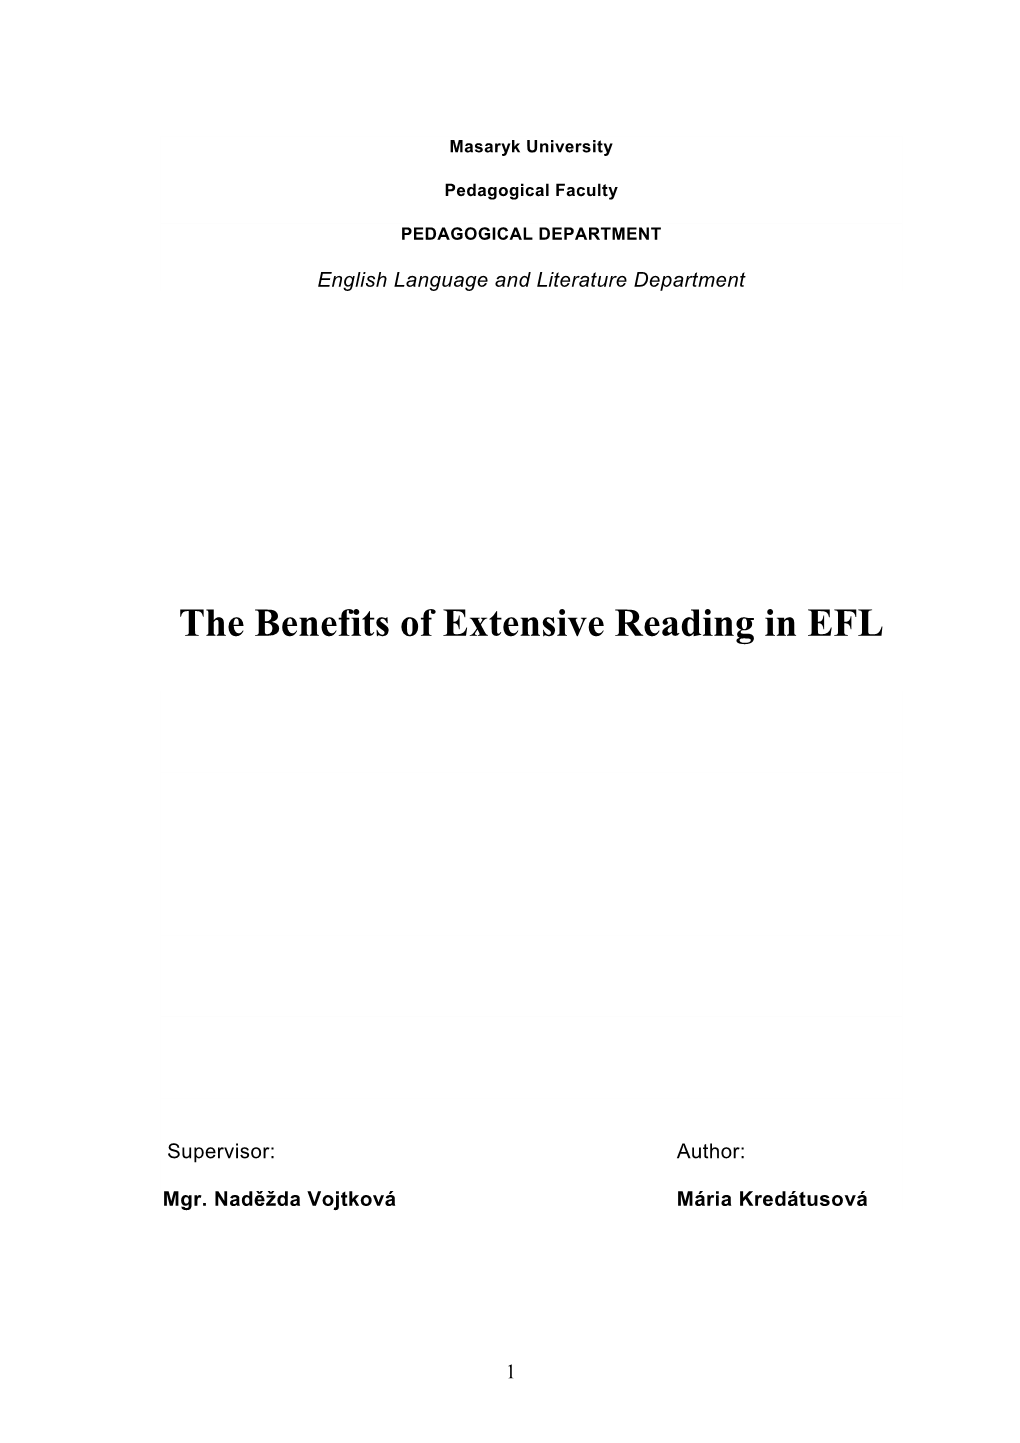 The Benefits of Extensive Reading in EFL